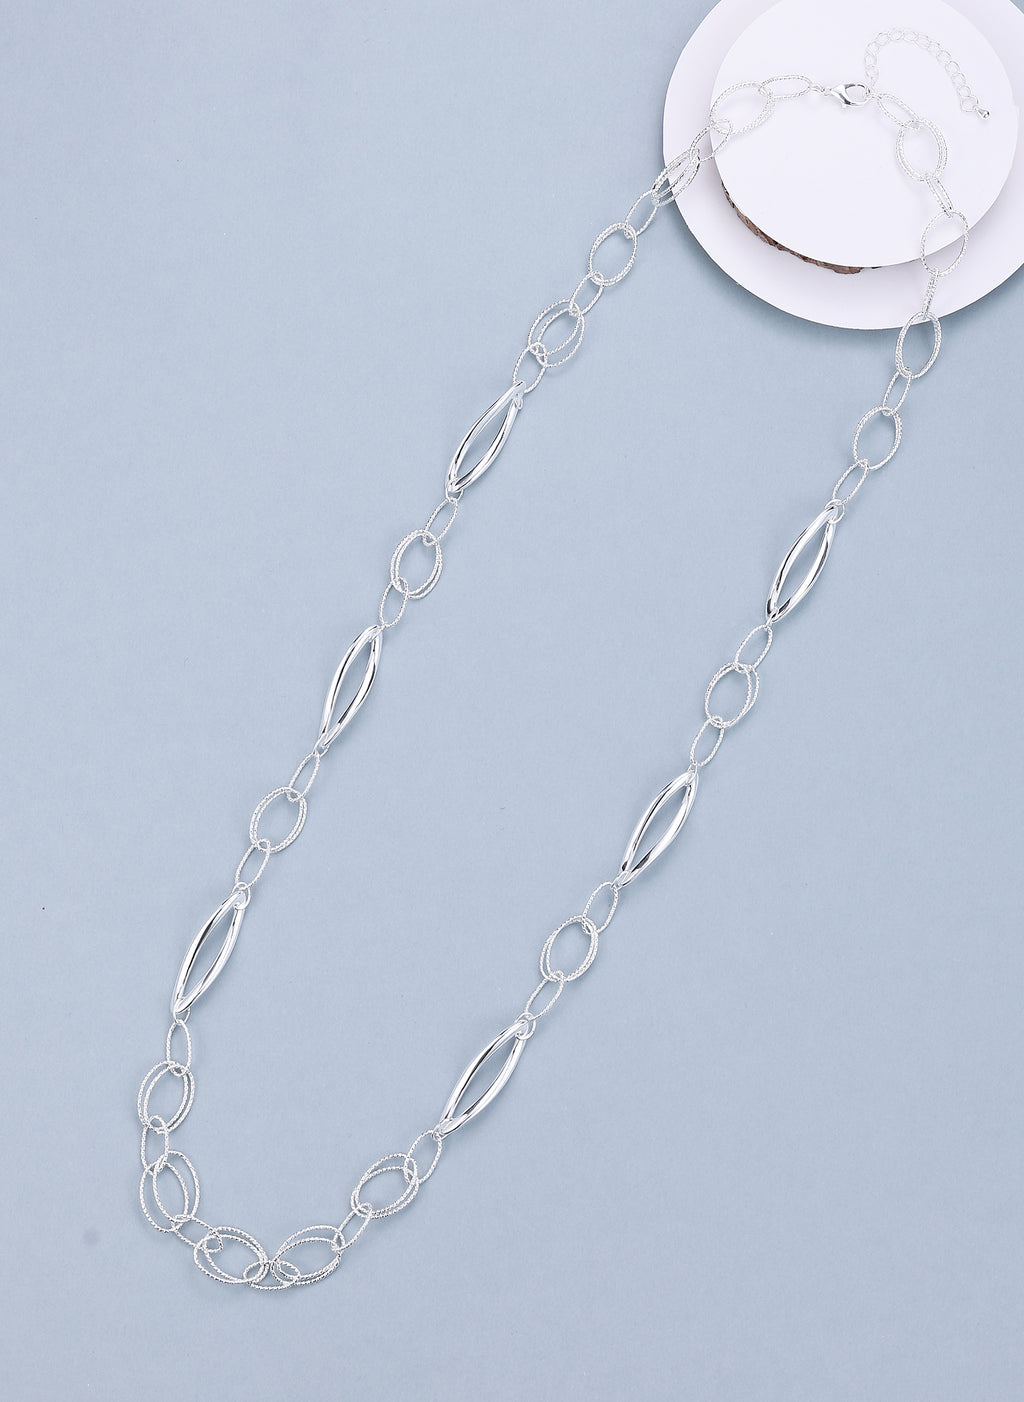 Long necklace, with silver interlinked circles - on a silver chain